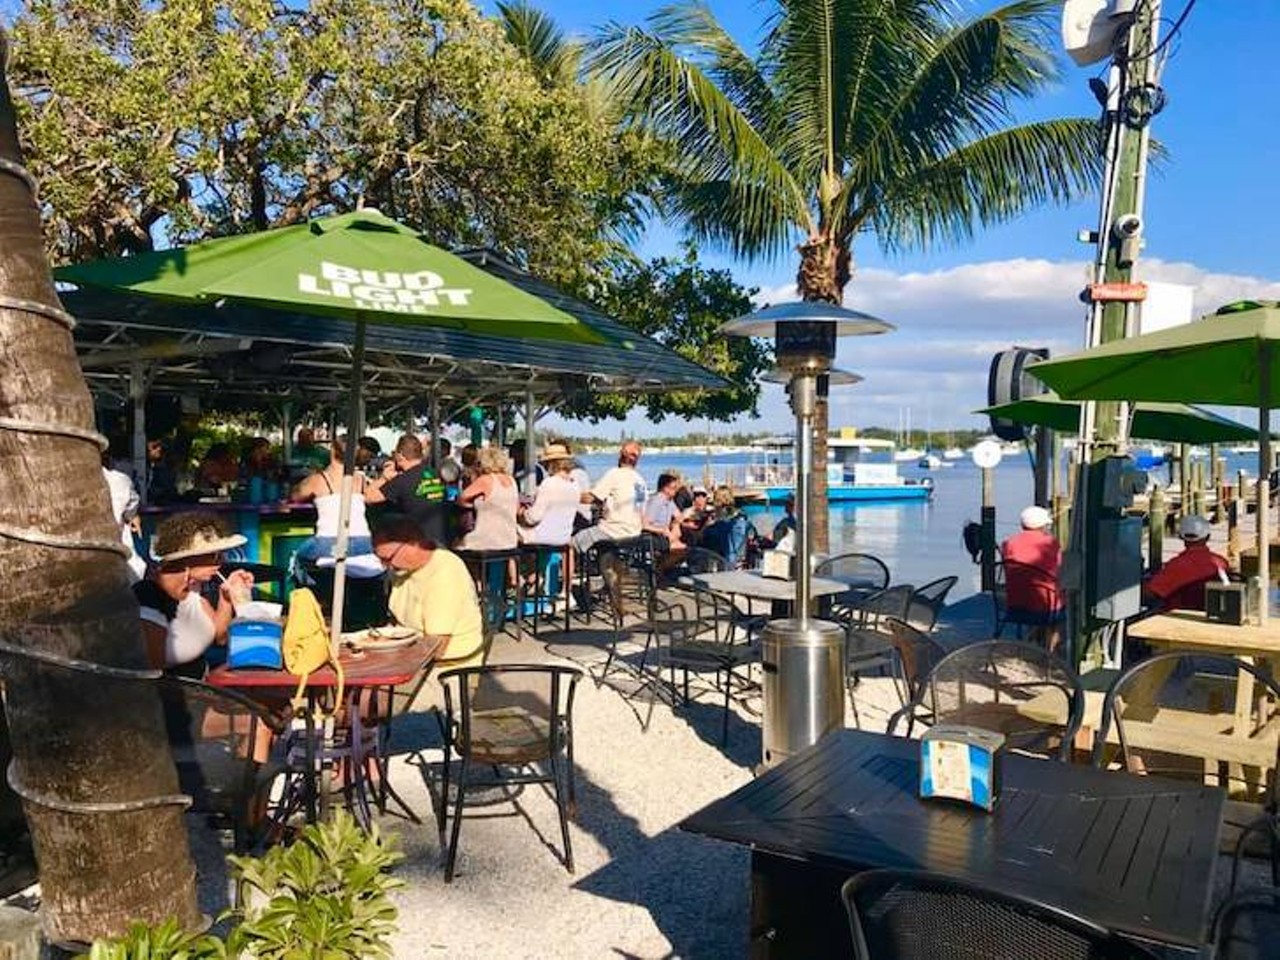 The Bridge Tender Inn & Dockside Bar  
135 Bridge St., Bradenton Beach
Since they&#146;re a waterfront restaurant on Anna Maria Island, The Bridge Tender&#146;s menu focuses on seafood and comfort food. The restaurant serves breakfast, lunch and dinner, and offers inside and outside seating. They also serve beer and cocktails.
Photo via The Bridge Tender Inn & Dockside Bar/Facebook